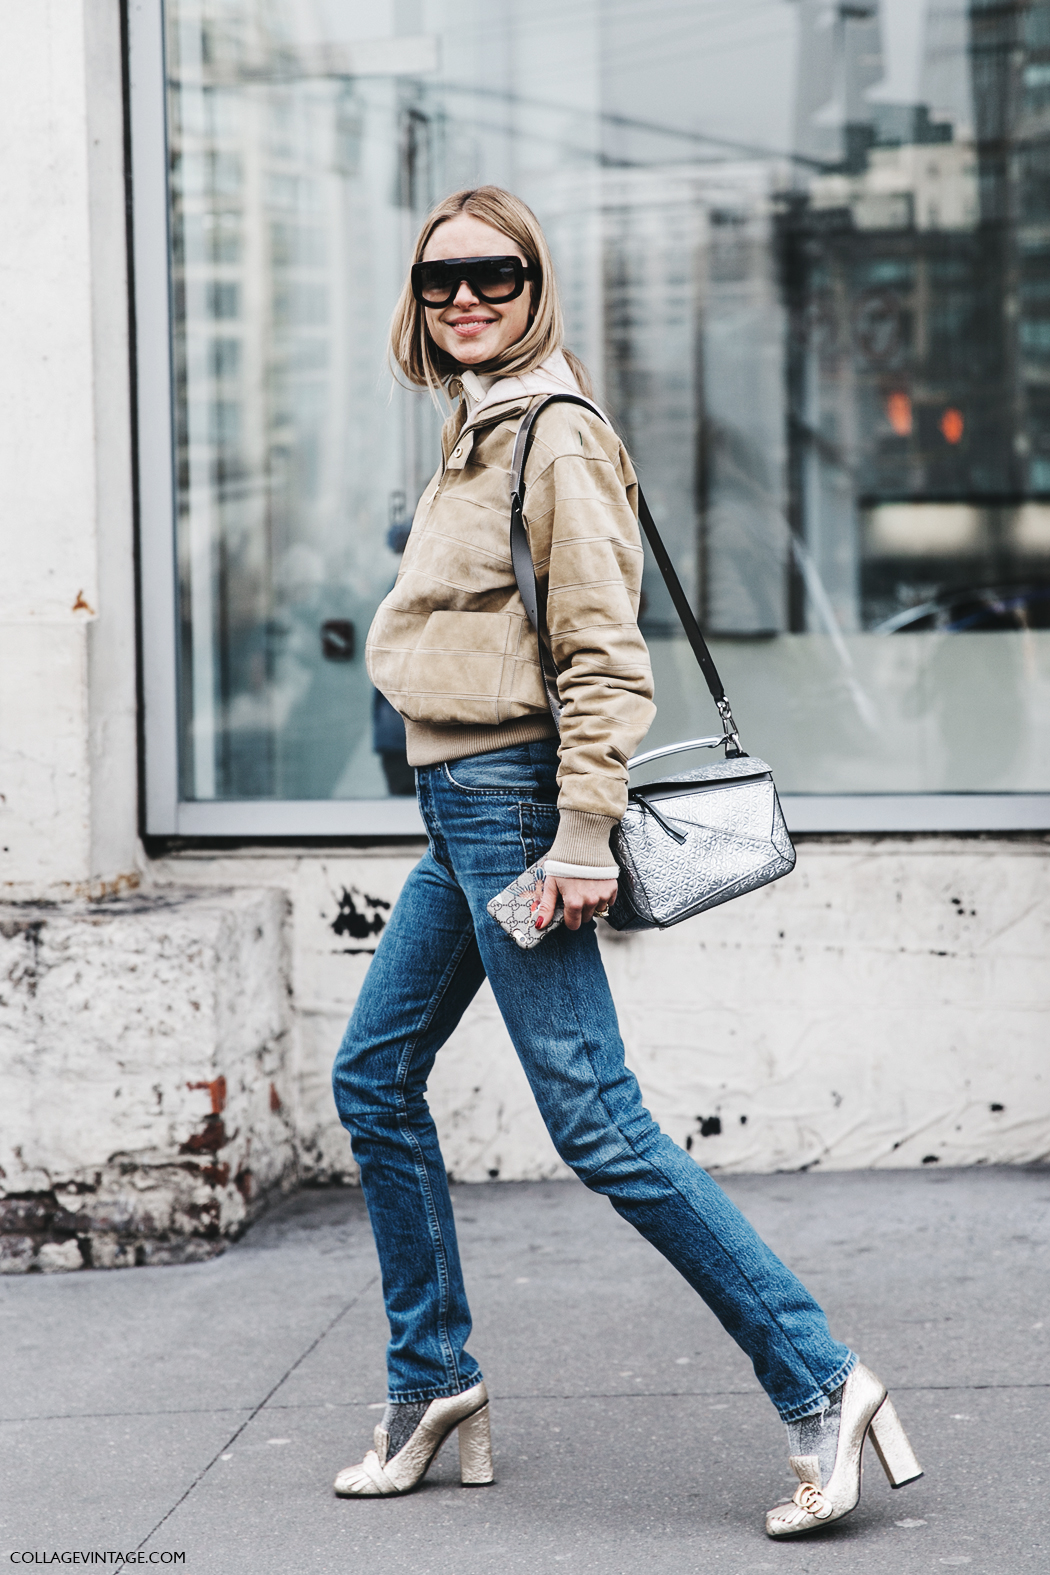 NYFW-New_York_Fashion_Week-Fall_Winter-17-Street_Style-Look_De_Pernille-Suede_Bomber-Loewe_Glitter_Bag-Gucci_Shoes-1